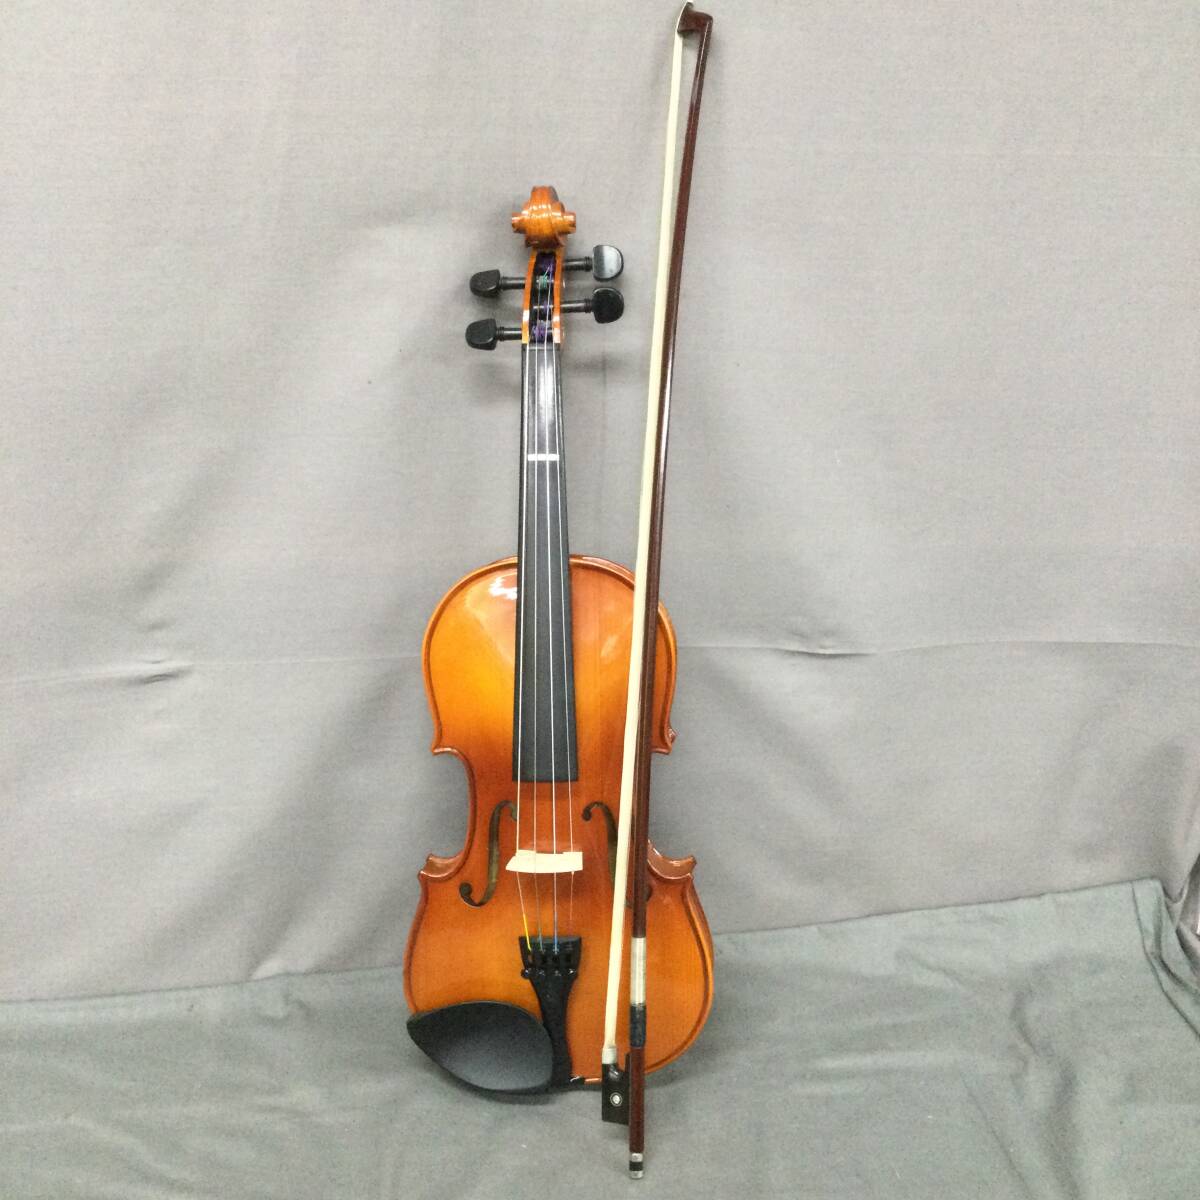 060516 265875-3 STENTOR MUSIC Co.LTD.va Io Lynn violin stringed instruments music case attaching total length approximately 59cm USED goods 